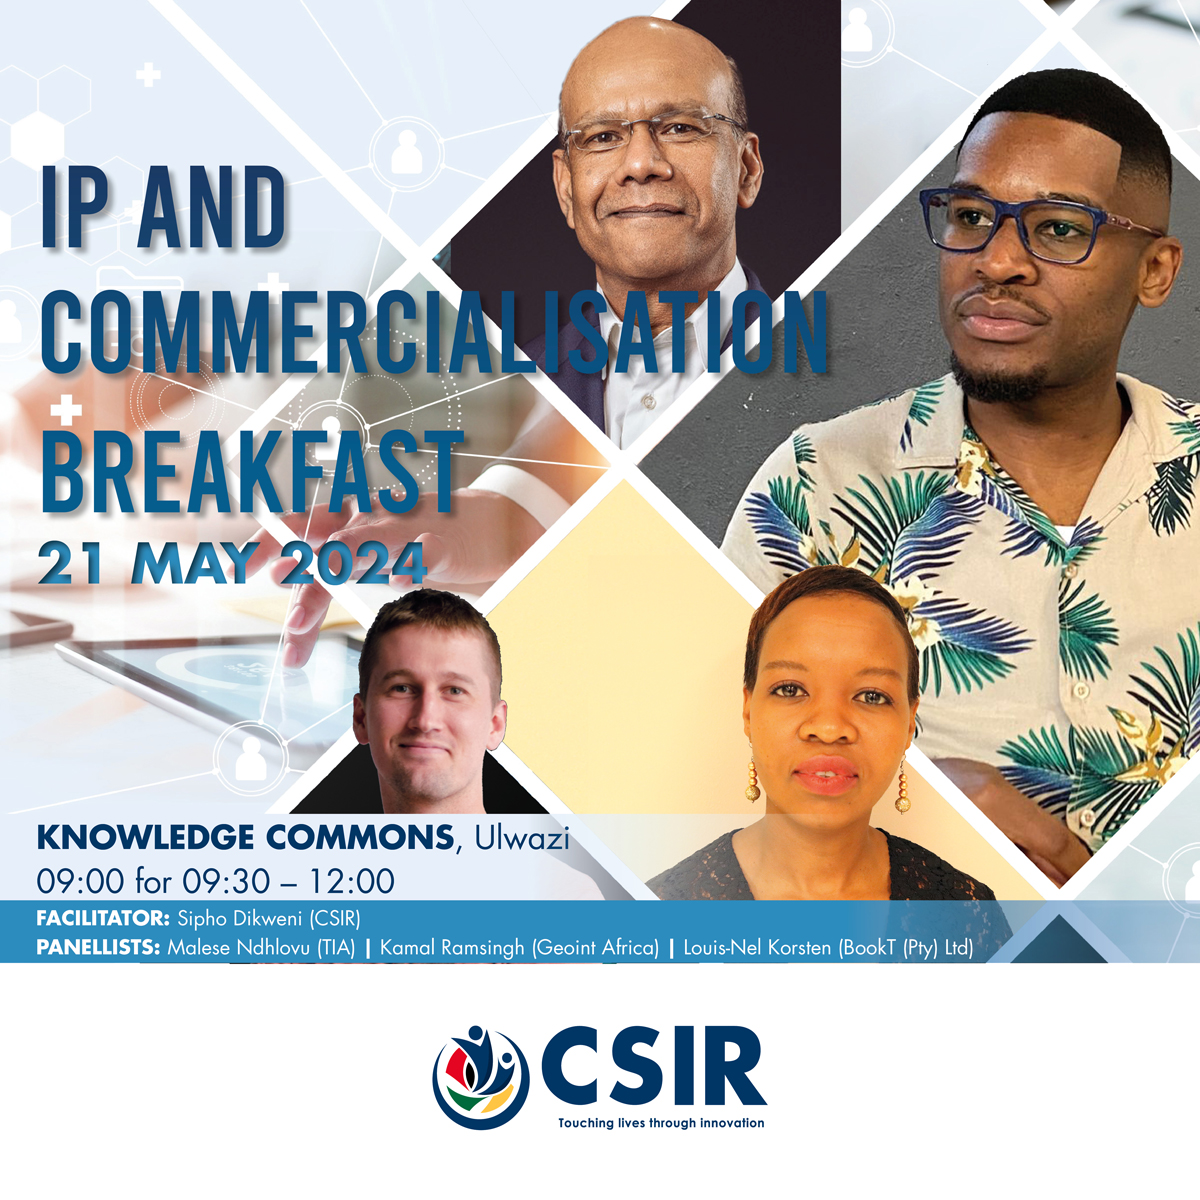 1/2 As part of #WorldIPDay #TeamCSIR will be hosting an IP & Commercialisation Breakfast on 21 May from 9:30 -12:00. Join industry experts Kamal Ramsingh, CEO & Founder of GeoINT Africa, Malese Ndhlovu from TIA & Louis-Nel Korsten, founder & CEO of Bookt & EdTech for “Customer...